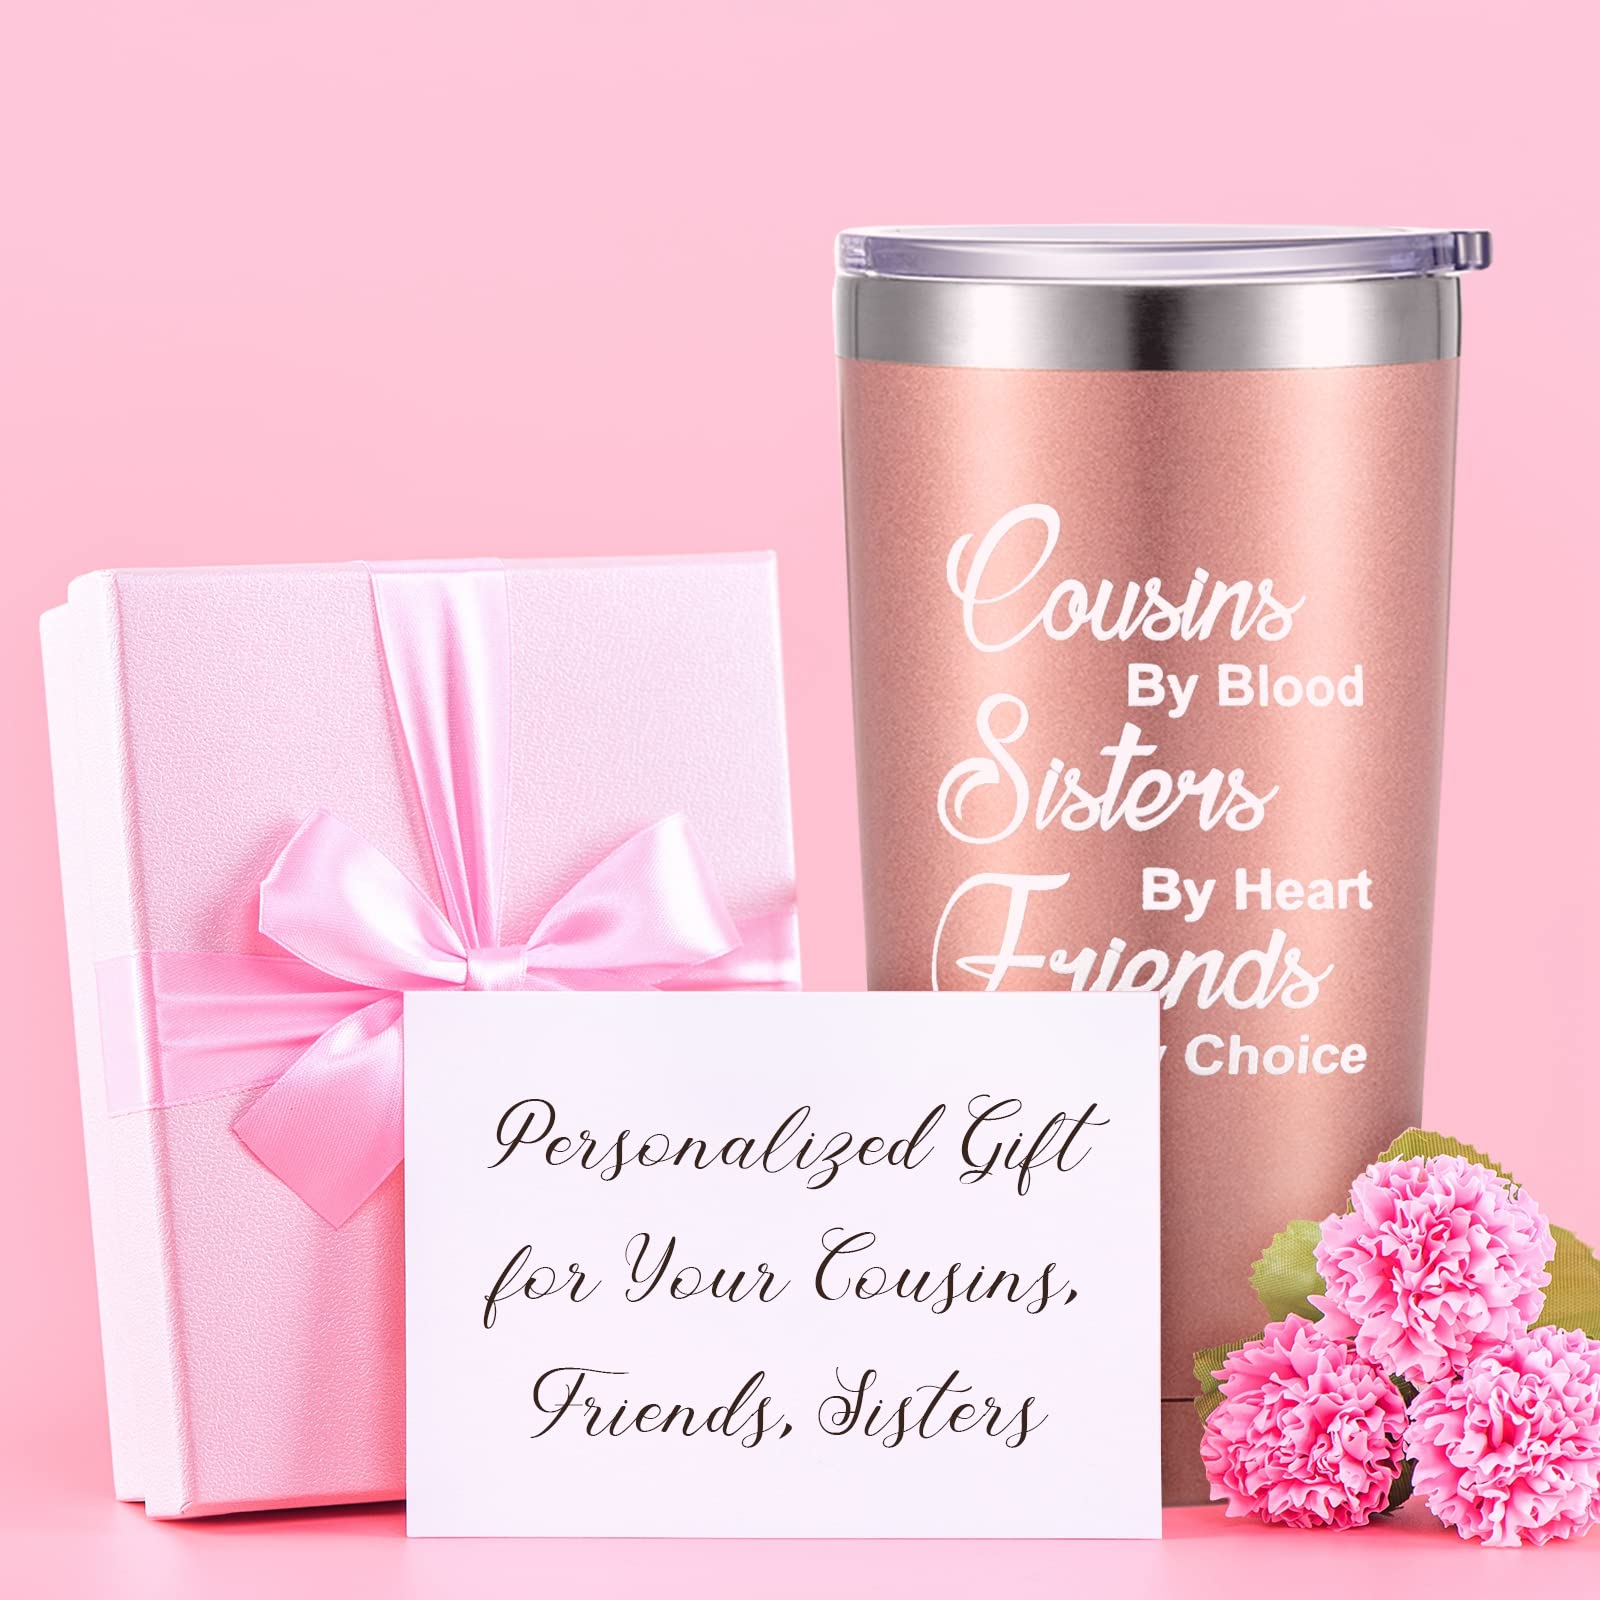 Cousins by Blood Sisters by Heart Friends by Choice Mug Tumbler Graduation Birthday Christmas Gift Idea for Cousins Presents for Women 20 OZ Vacuum Insulated Travel Tumbler with Box (Rose Gold)